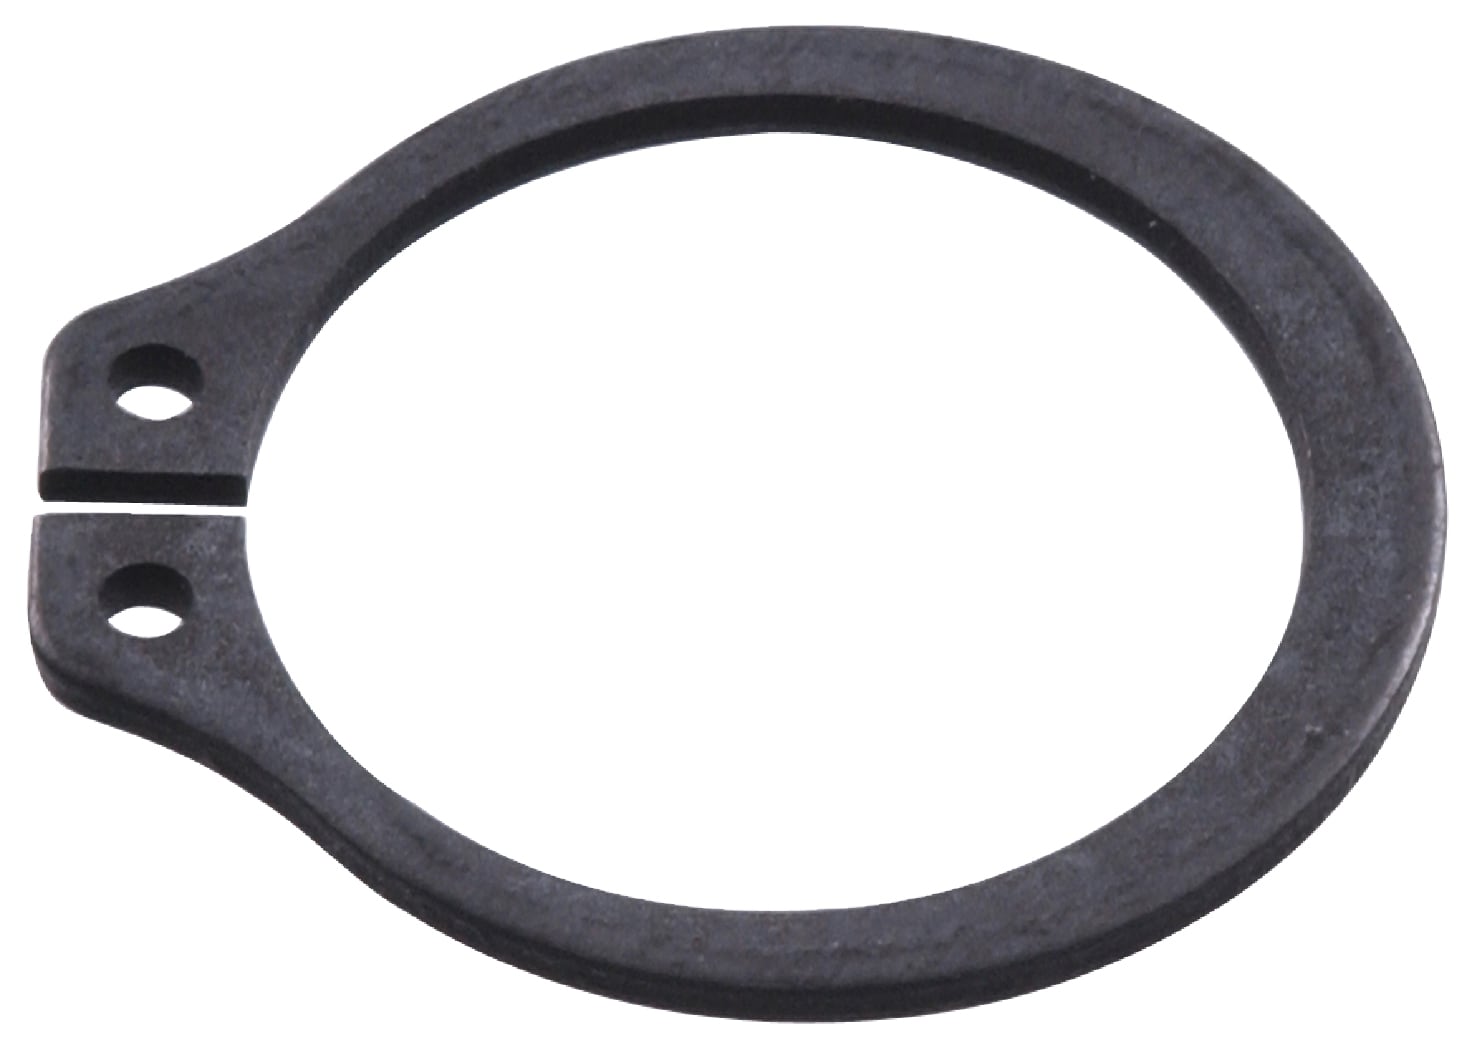 Hillman 0.5-in Black External Retaining Ring (2-Pack) in the